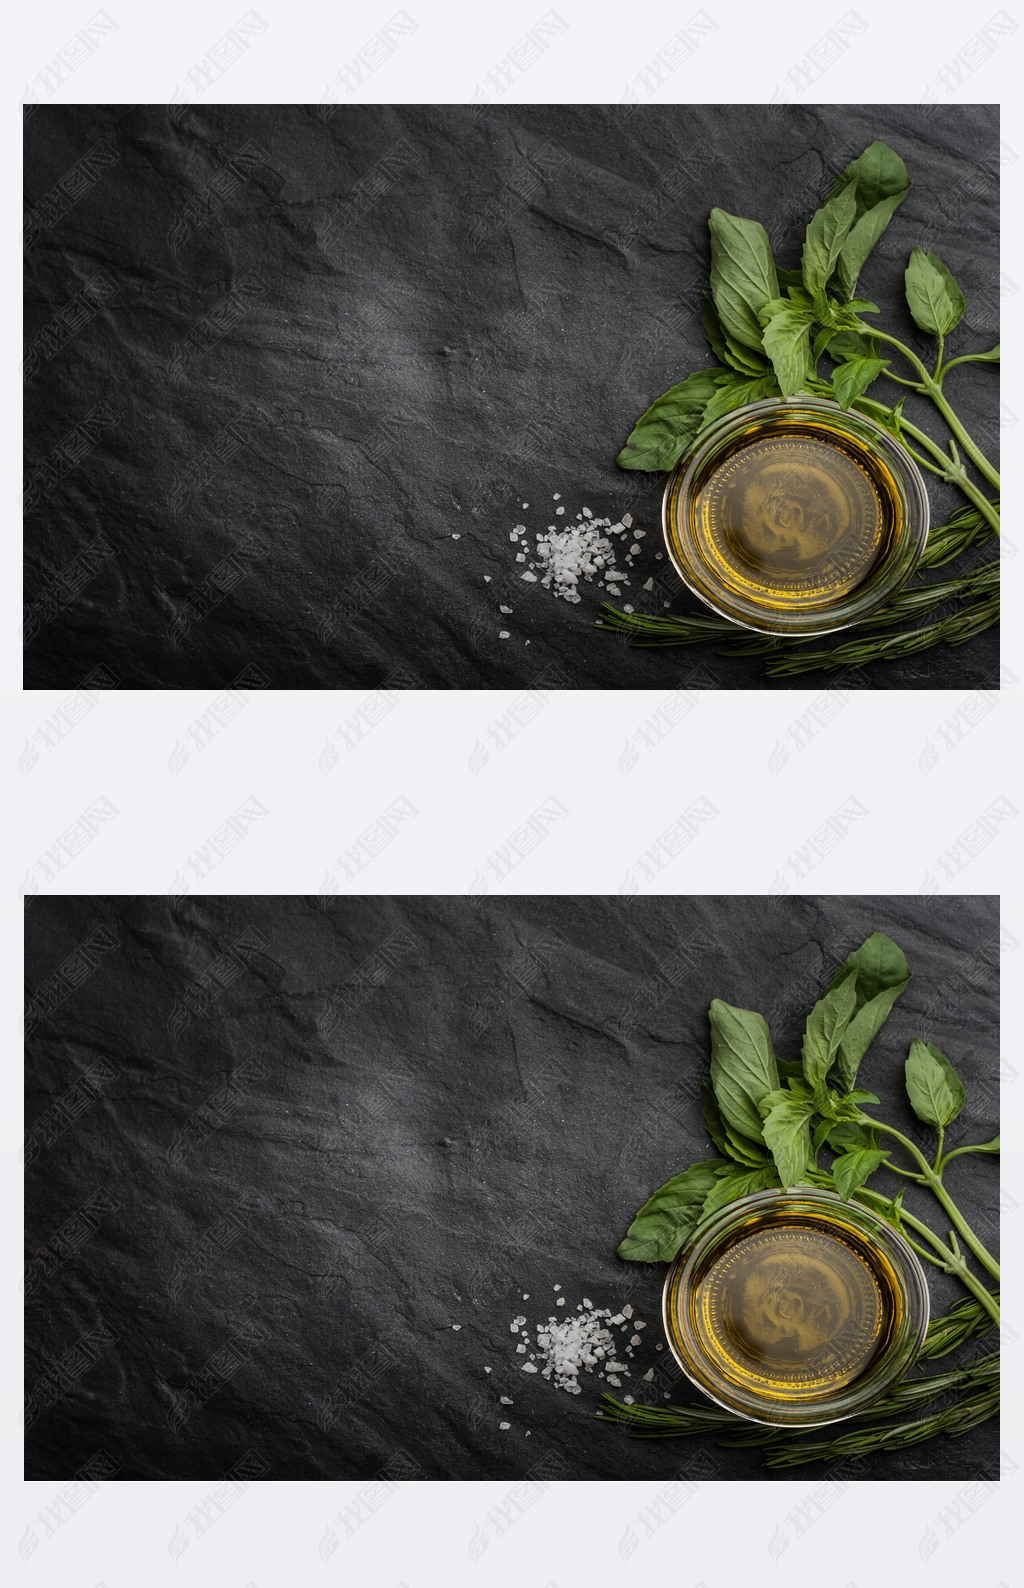 Olive oil  with different greens on the right side of the black stone table